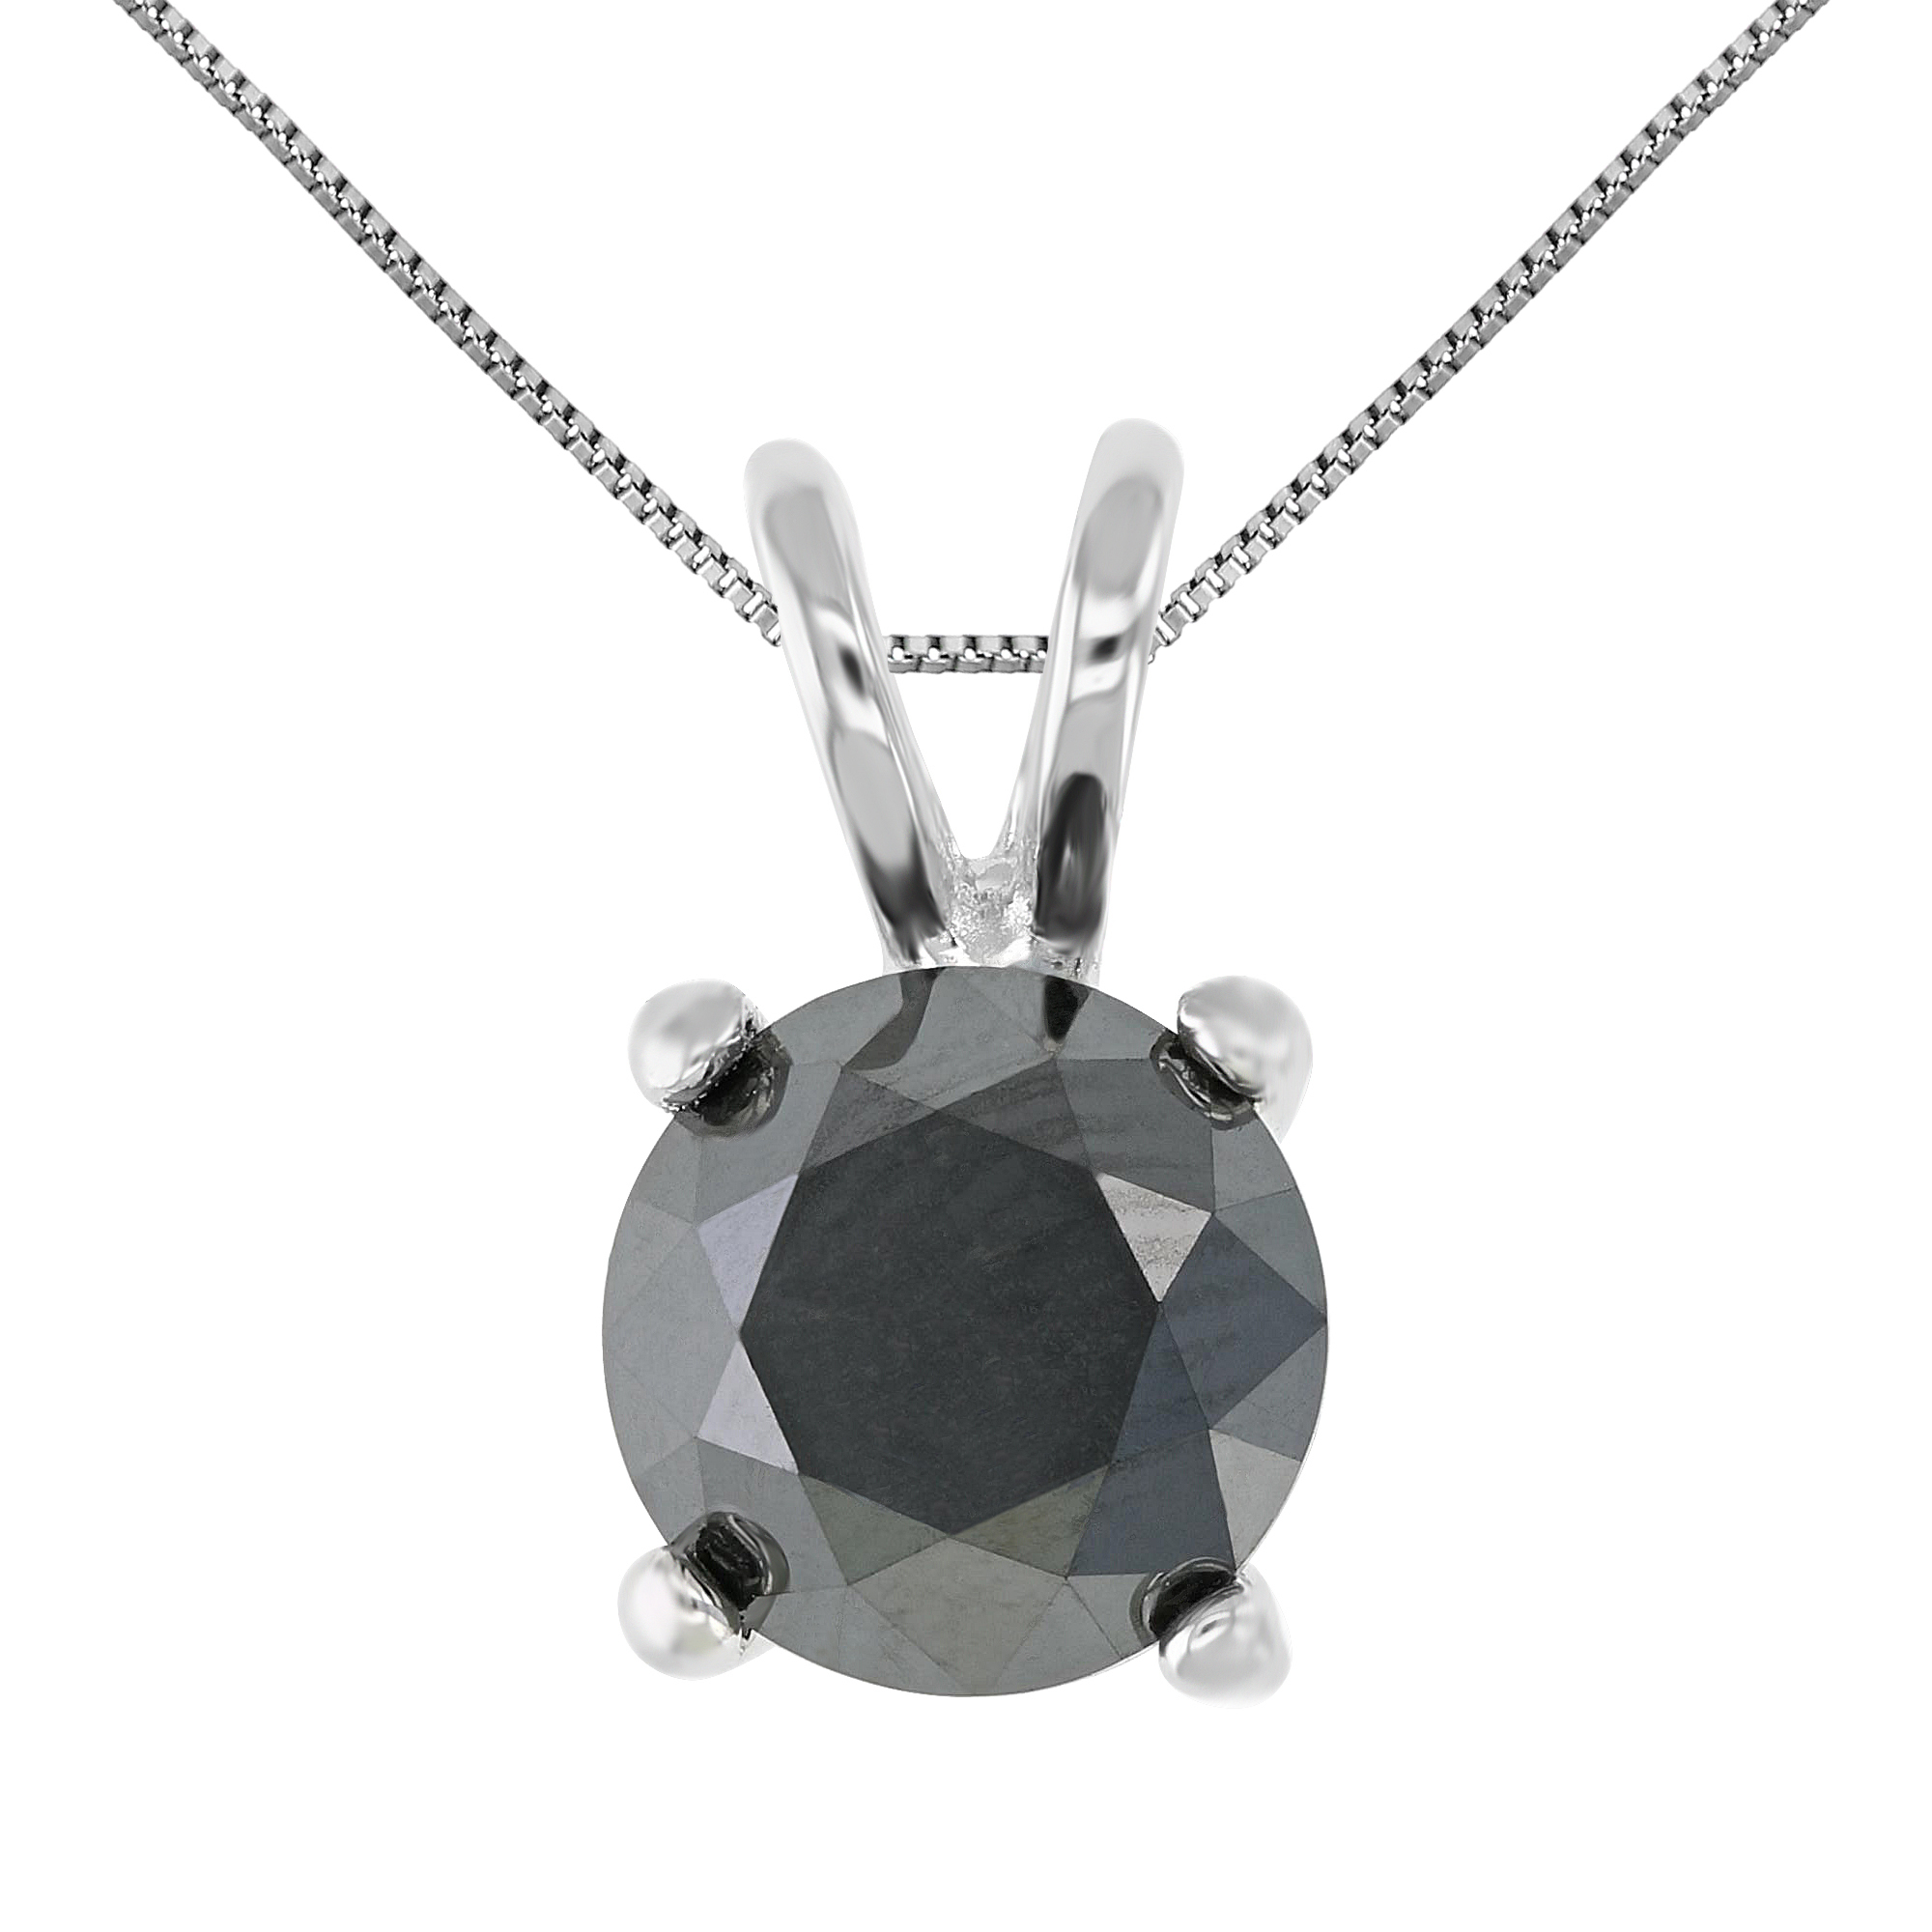 Vir Jewels 1 cttw Black Diamond Solitaire Pendant .925 Sterling Silver Round with Chain